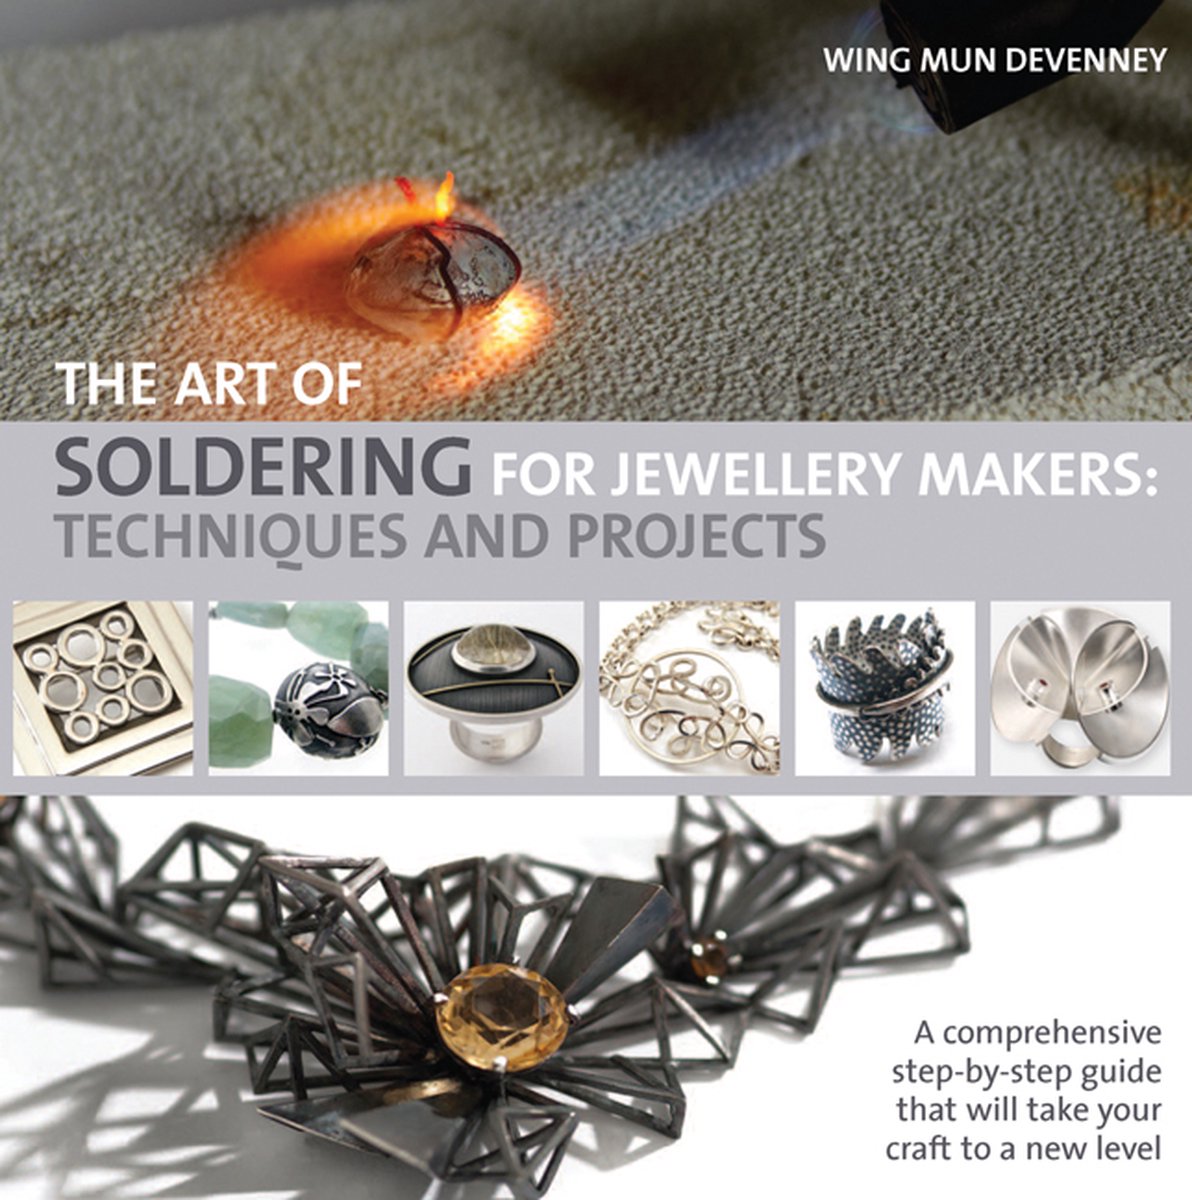 Art Of Soldering For Jewellery Makers - Wing Mun Devenney